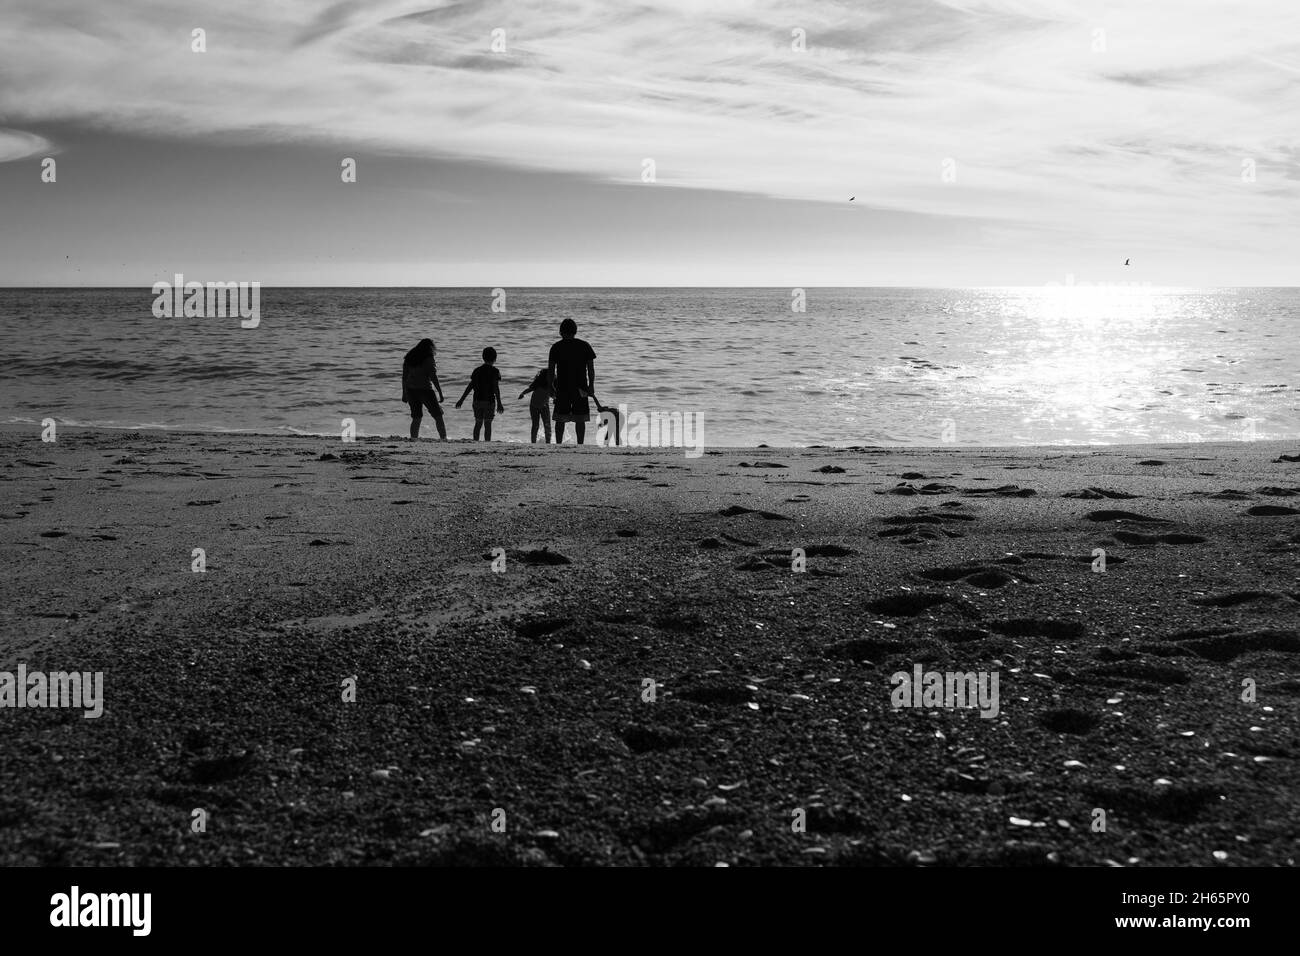 Family silhouette walking on the beach at sunset. Movie scene concept, black and white photography Stock Photo